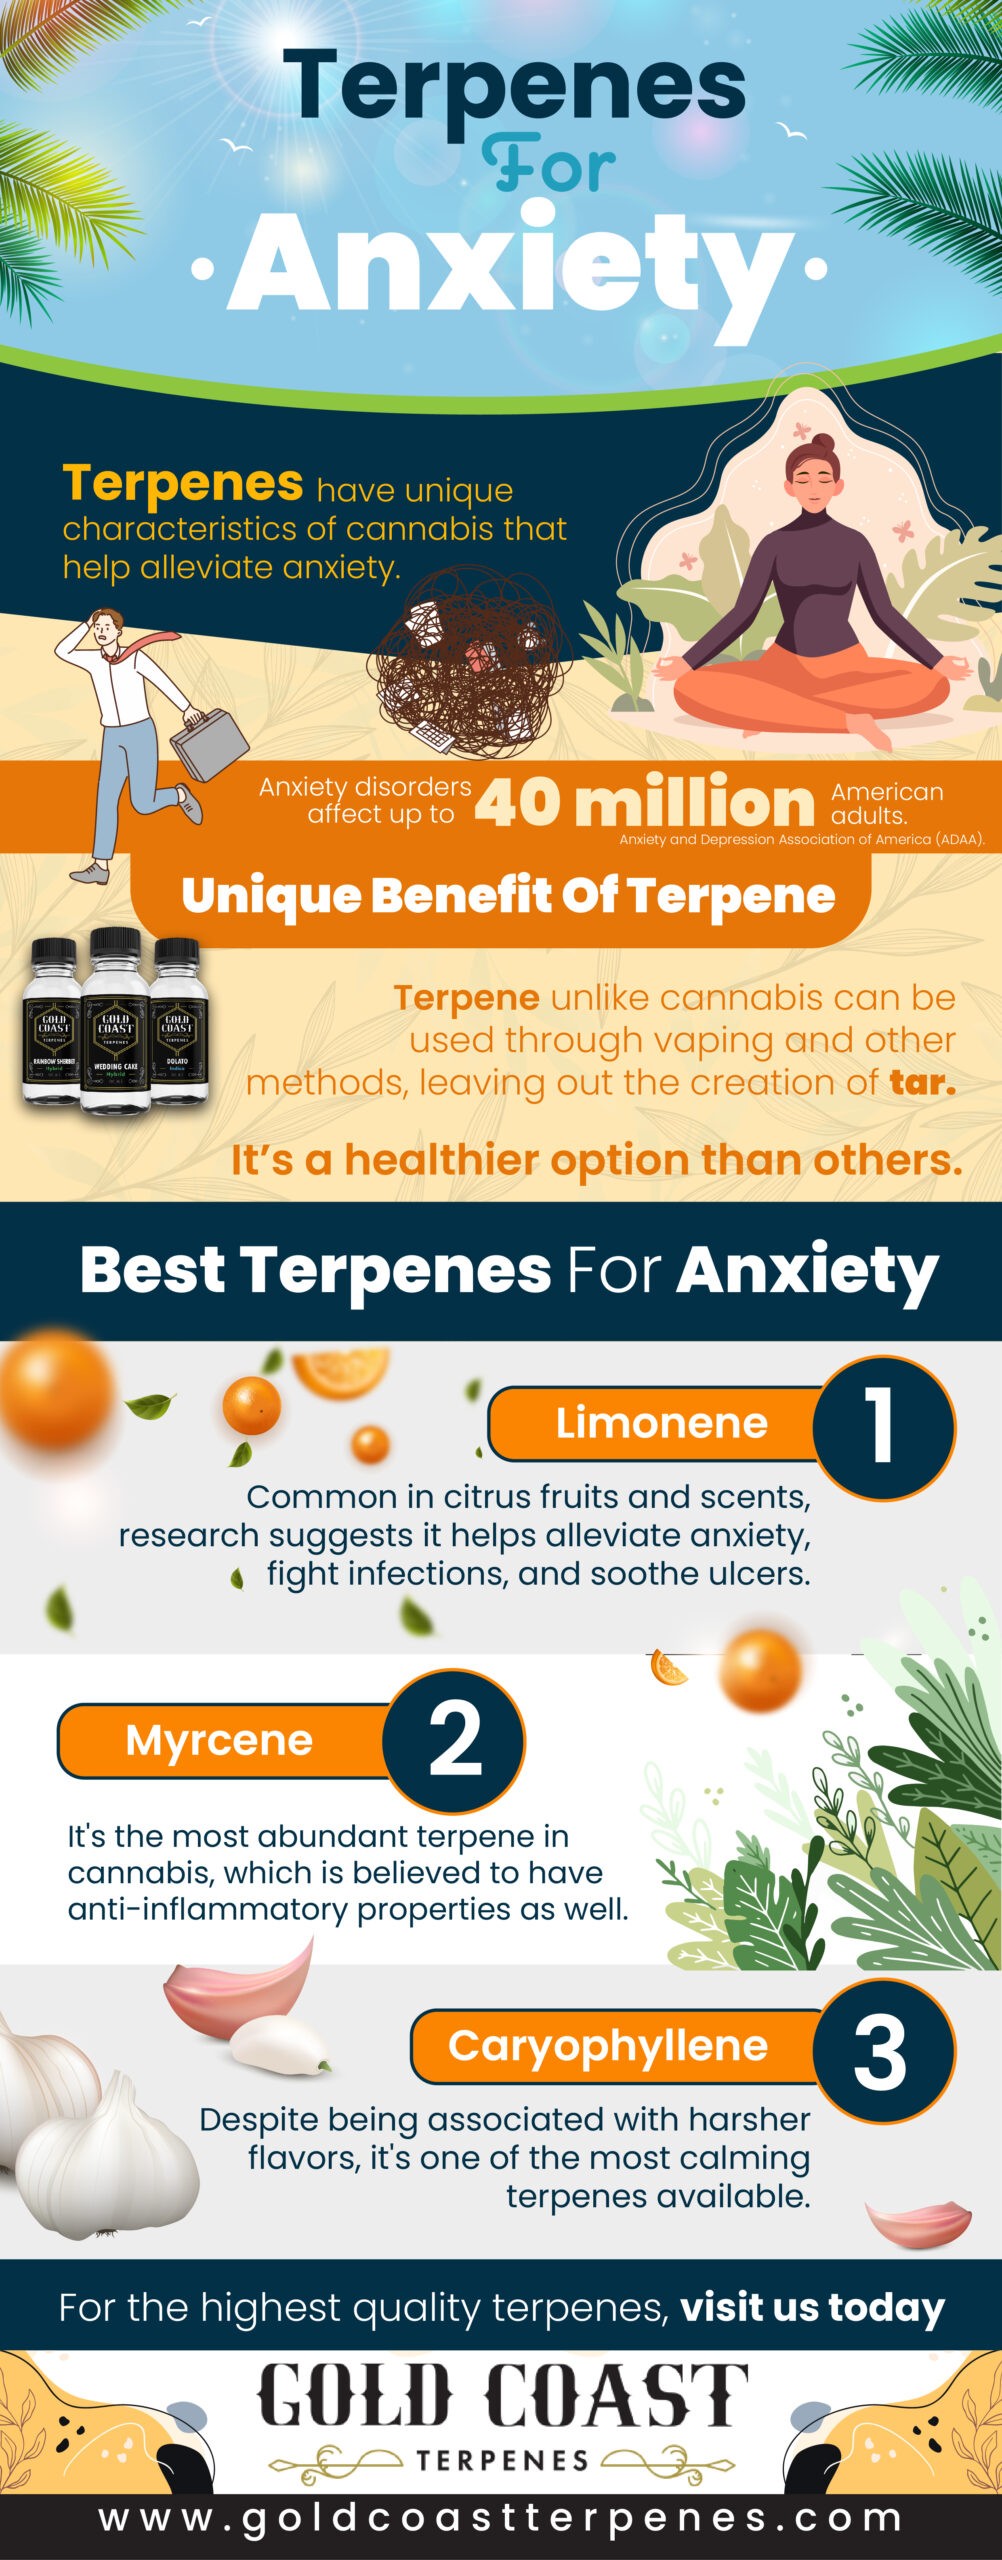 Terpenes For Anxiety